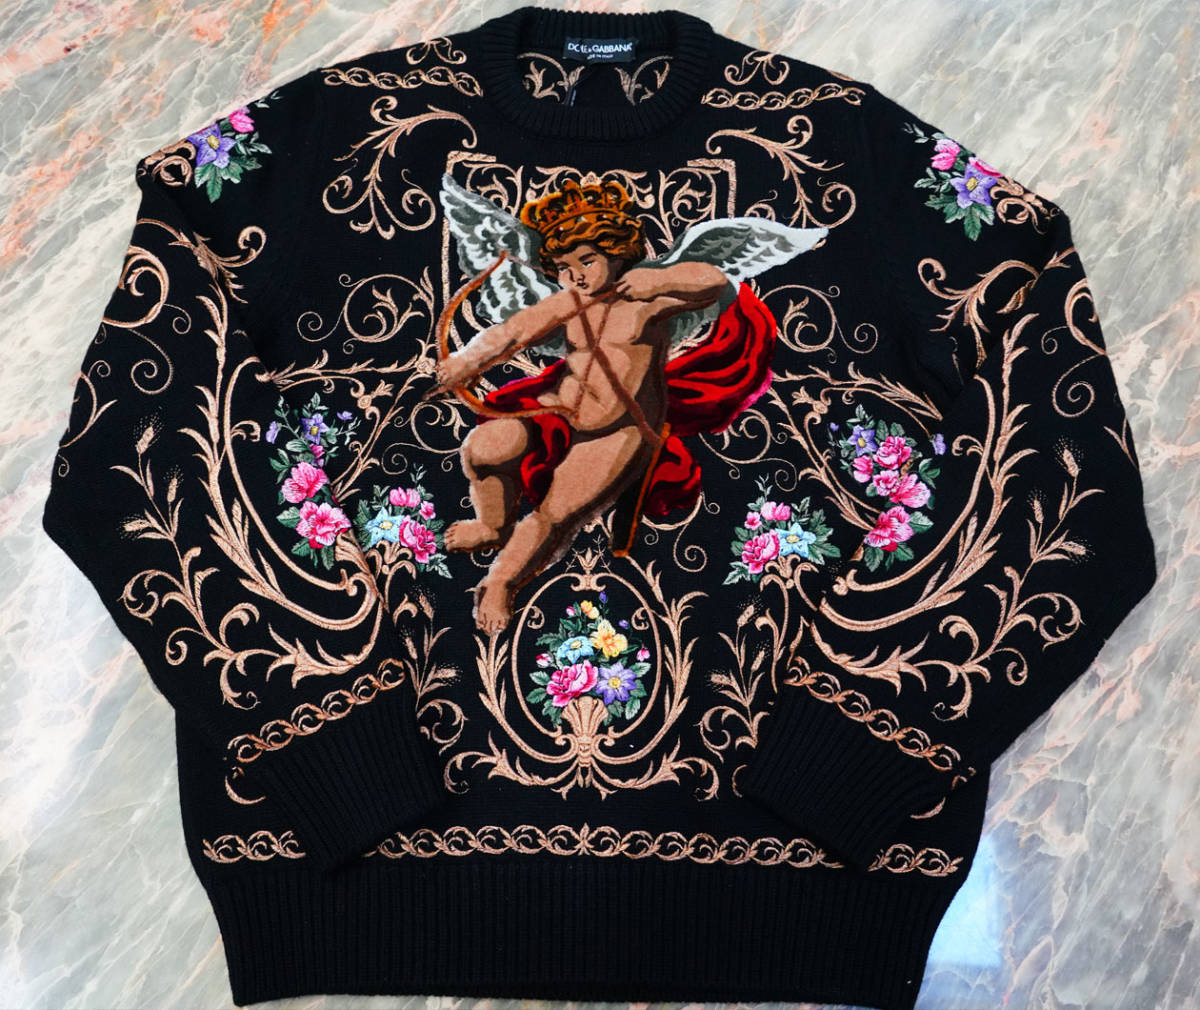  new goods * Dolce & Gabbana DOLCE&GABBANA 2018AW collection Ran way appearance embroidery cashmere 100% knitted sweater (54)* regular price 55 ten thousand 